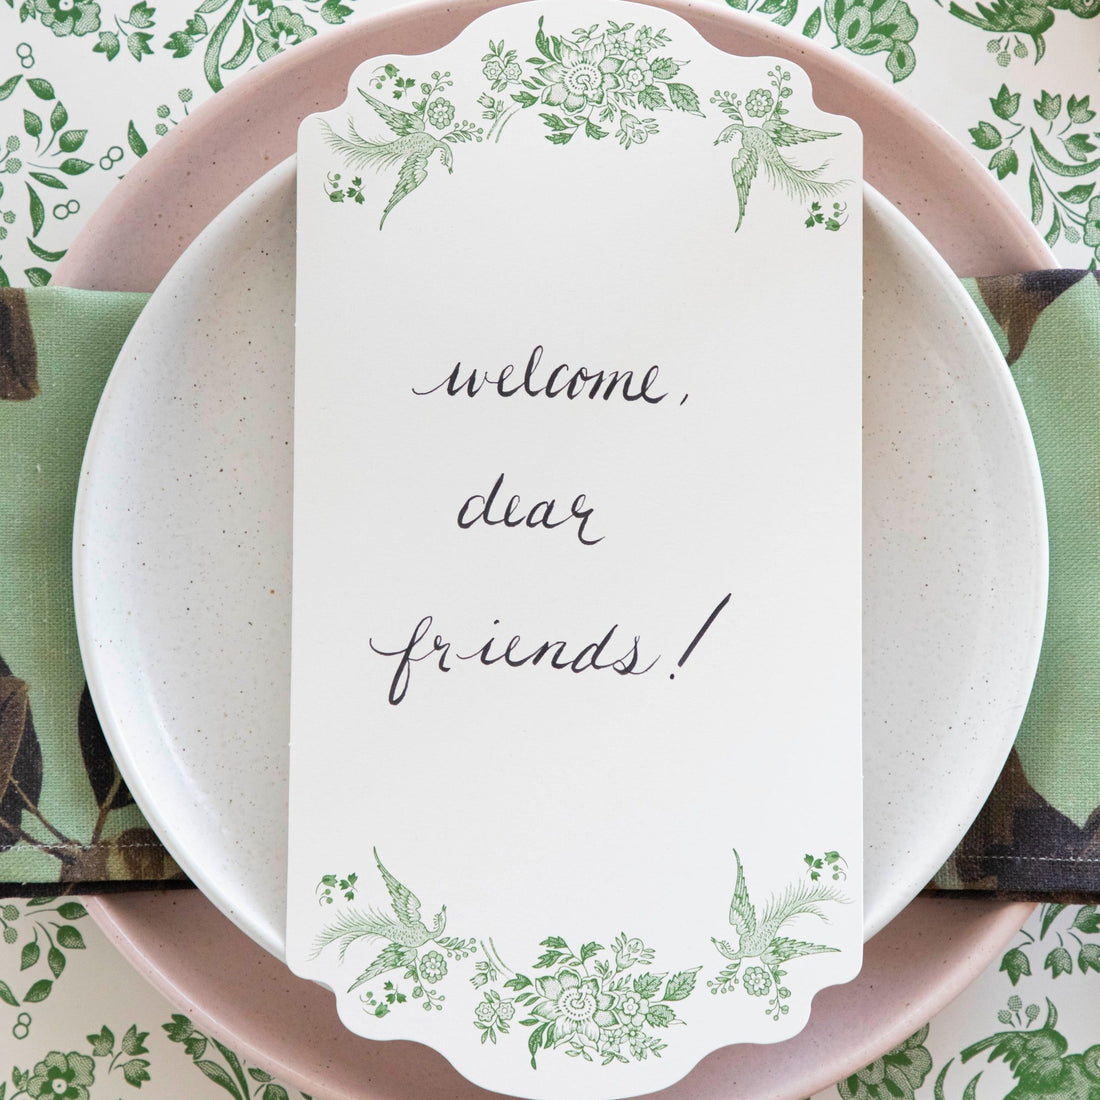 Close-up of a Green Asiatic Pheasants Table Card with &quot;Welcome, dear friends!&quot; written on it in cursive resting on the plate of an elegant place setting.